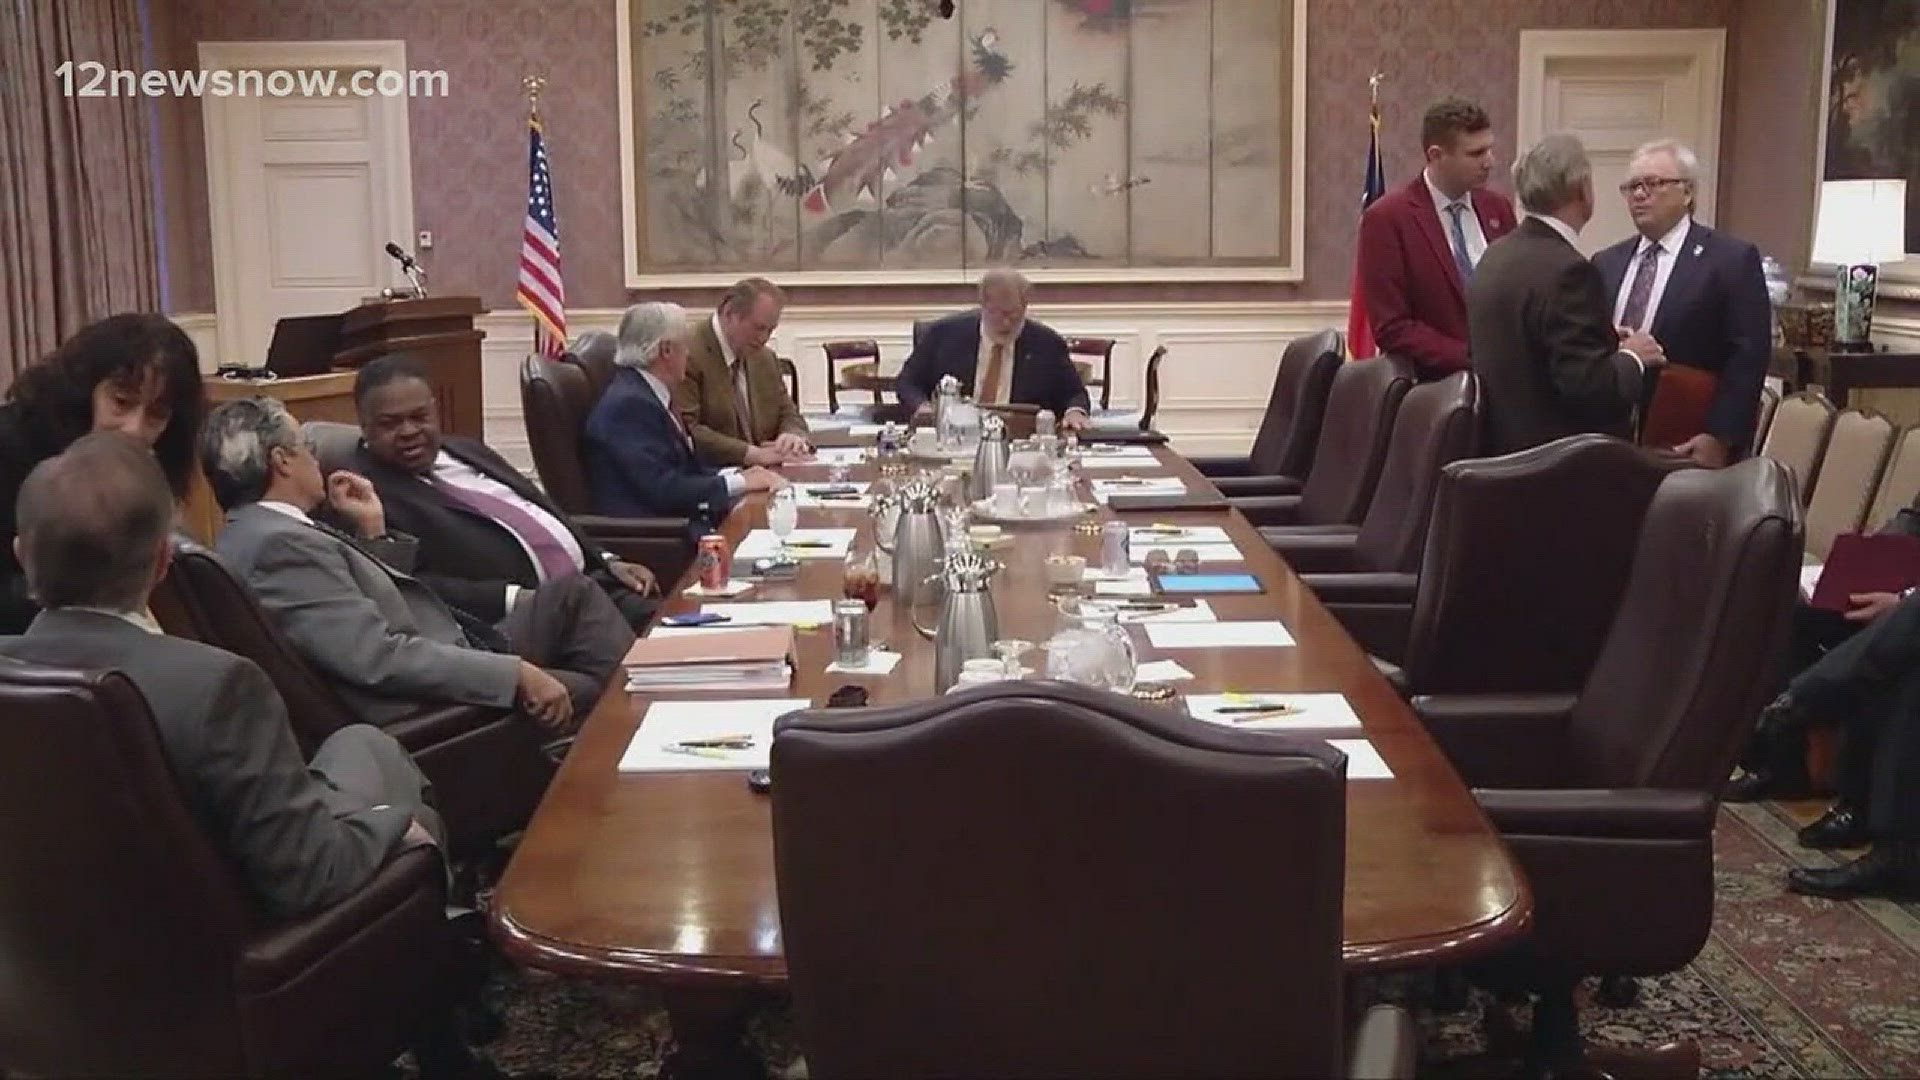 Texas A&M Board of Regents meeting adjourns Thursday without taking any action